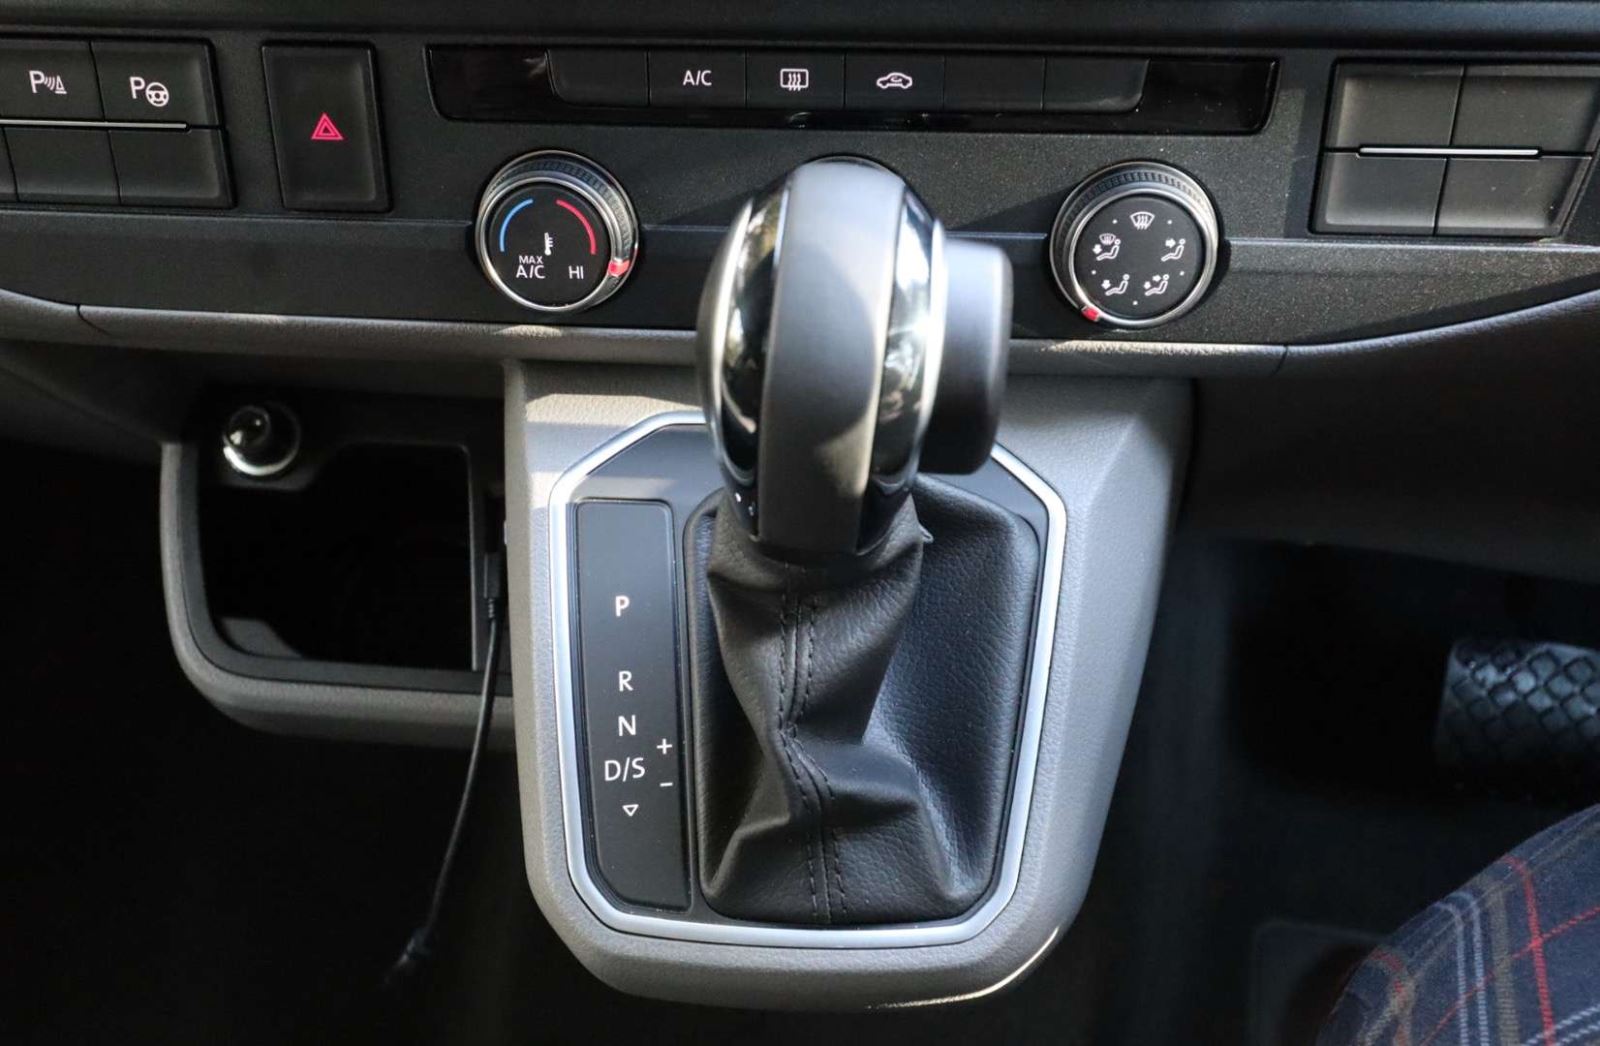 An automatic gearbox